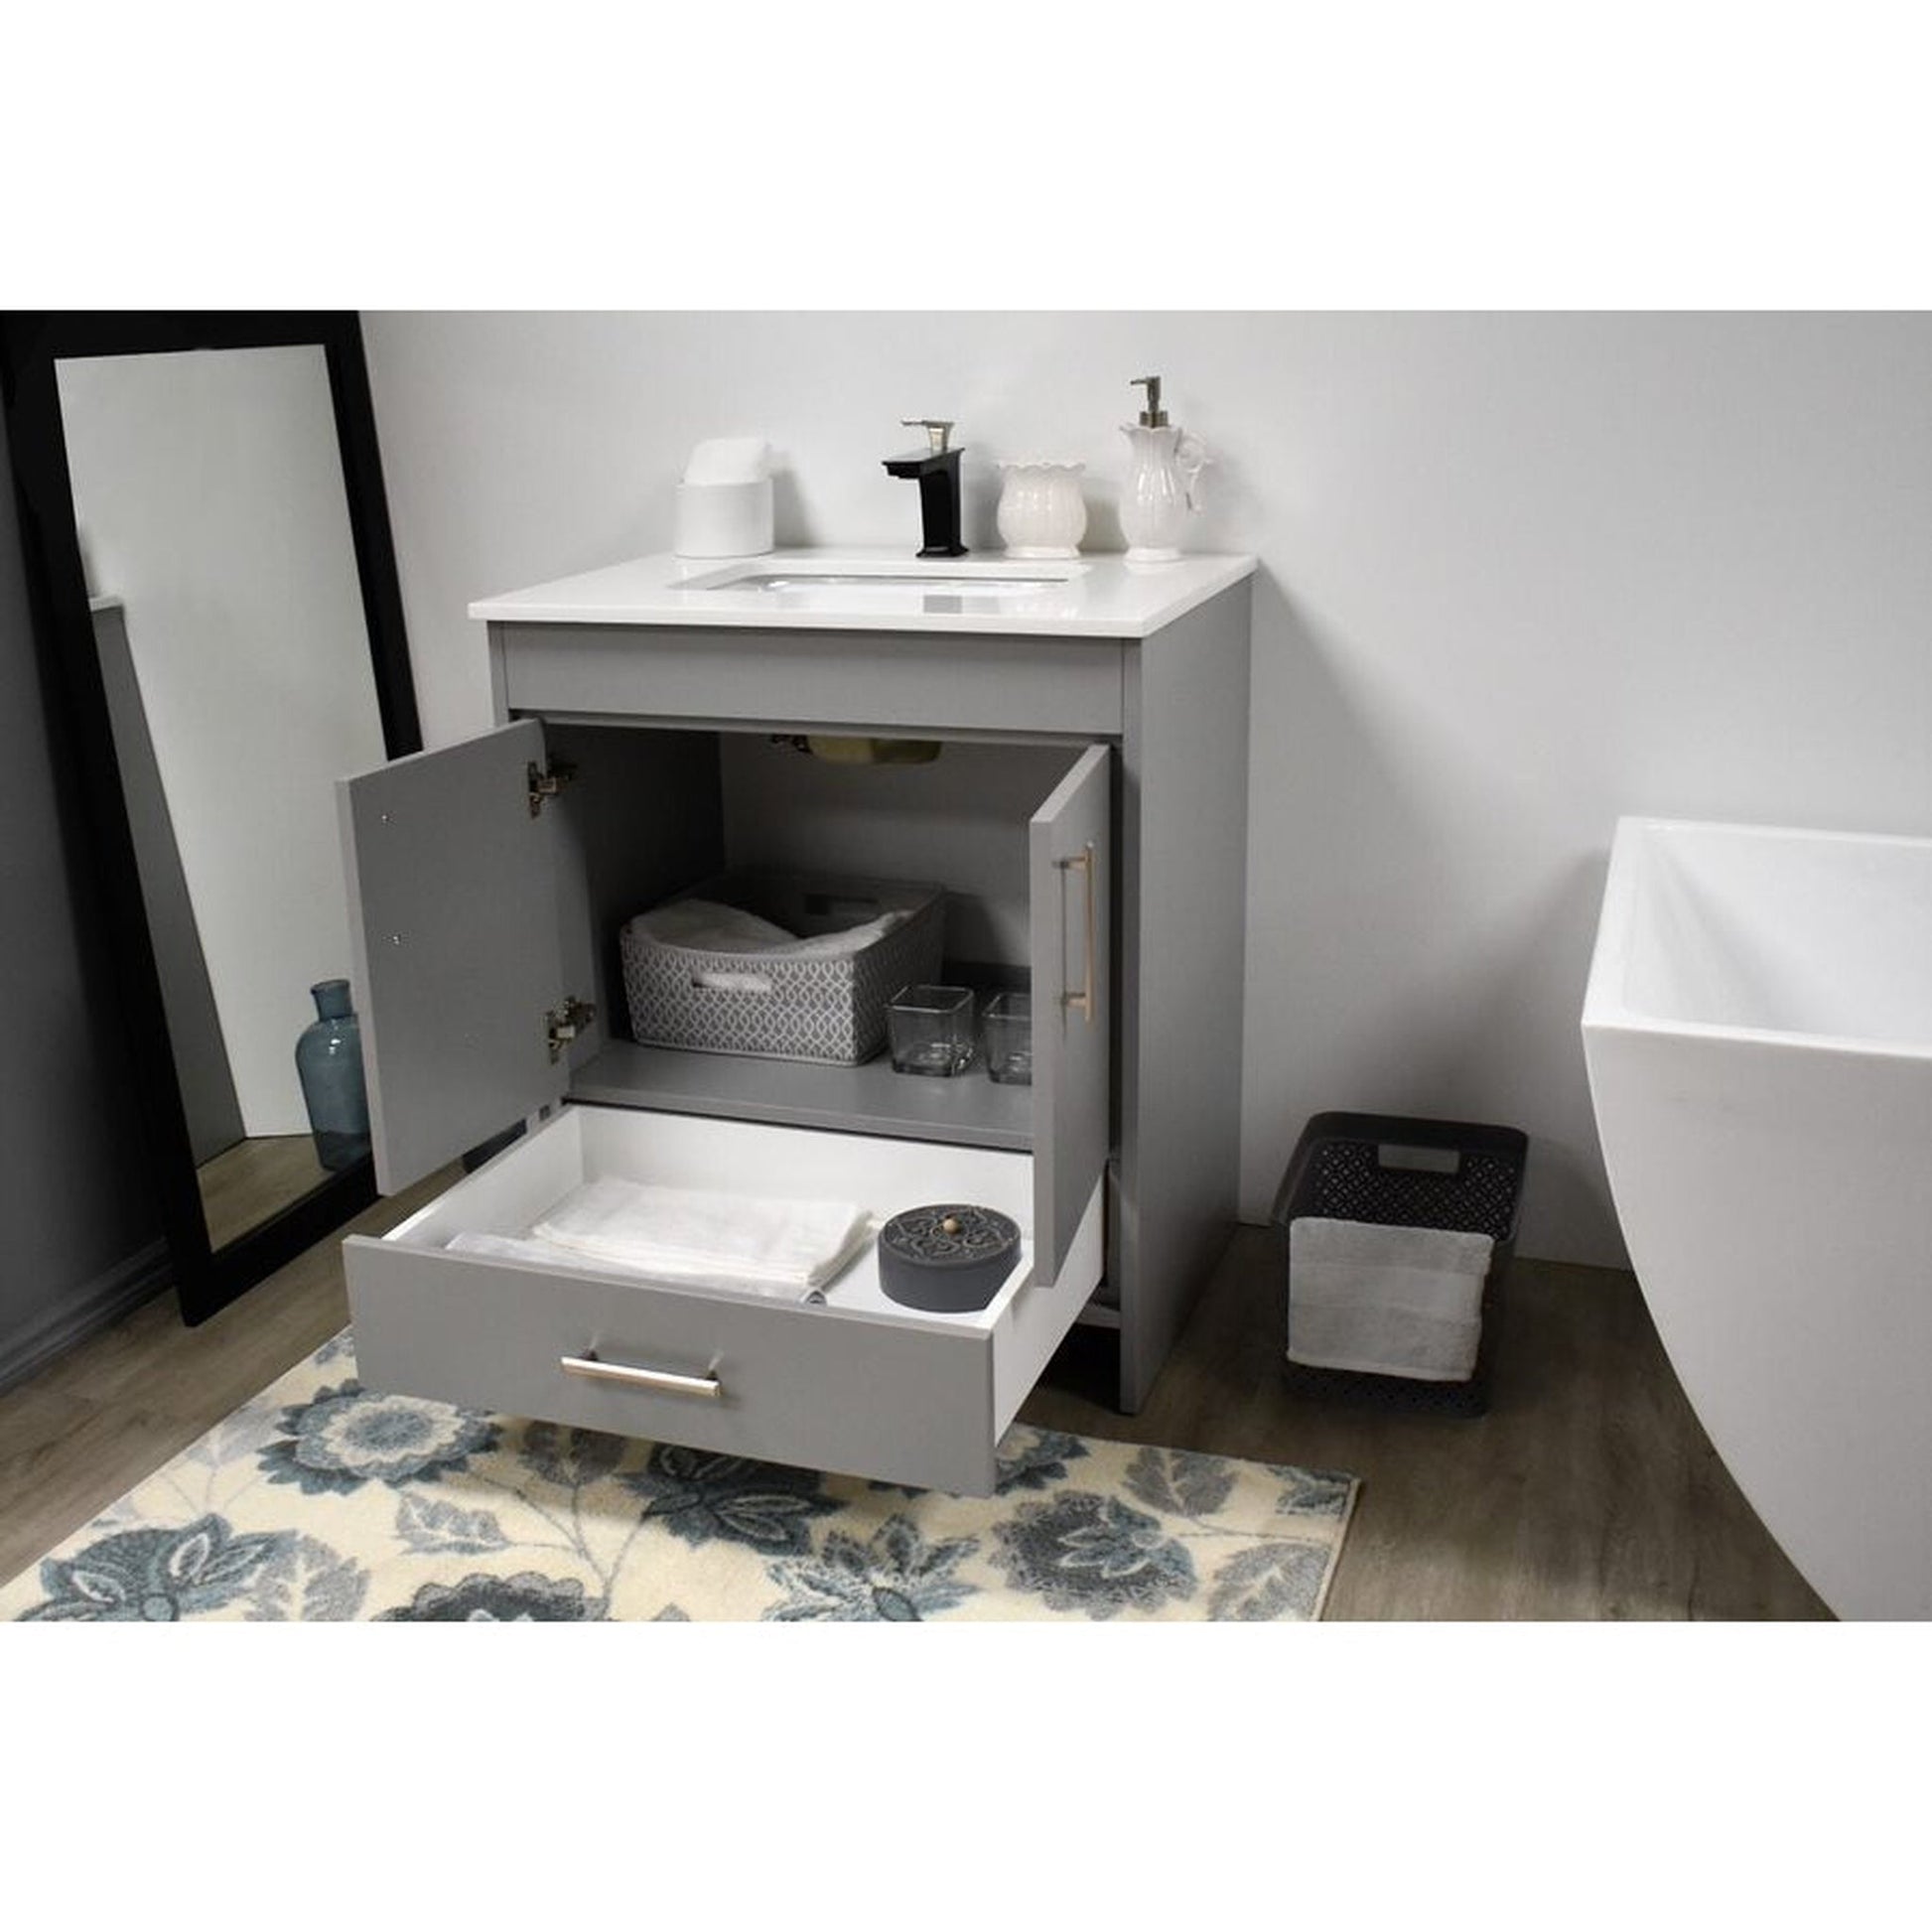 Volpa USA Capri 30" x 22" Gray Freestanding Modern Bathroom Vanity With Preinstalled Undermount Sink And White Microstone Top With Brushed Nickel Edge Handles